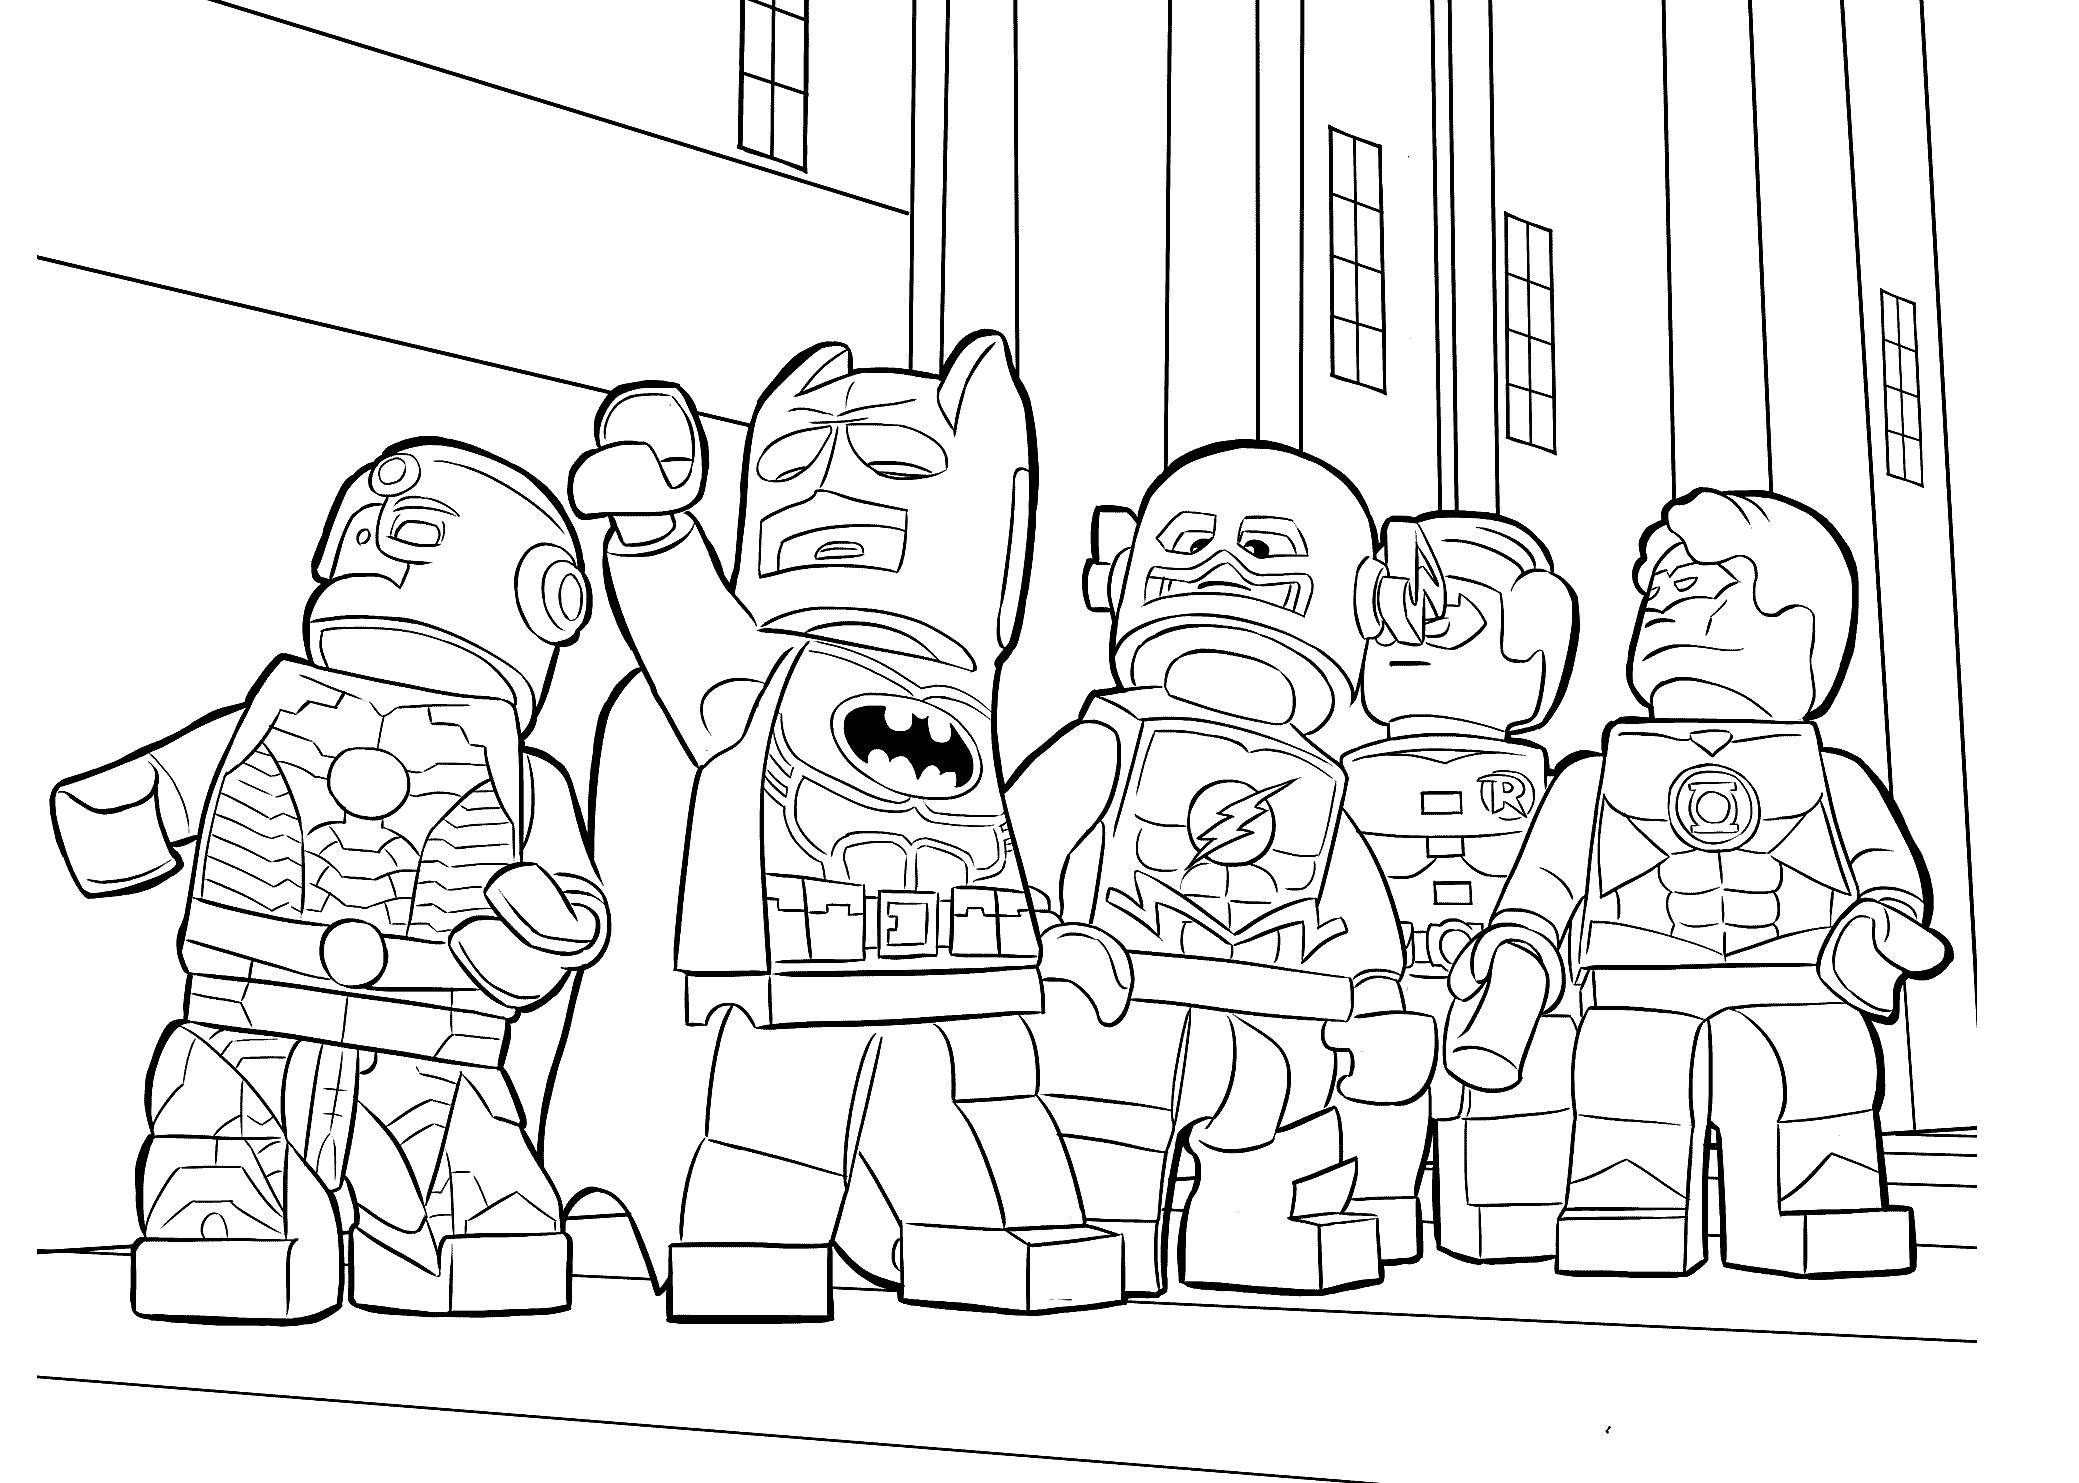 Free Printable Coloring Pages For Boys
 Lego heroes coloring page for boys printable free Lego